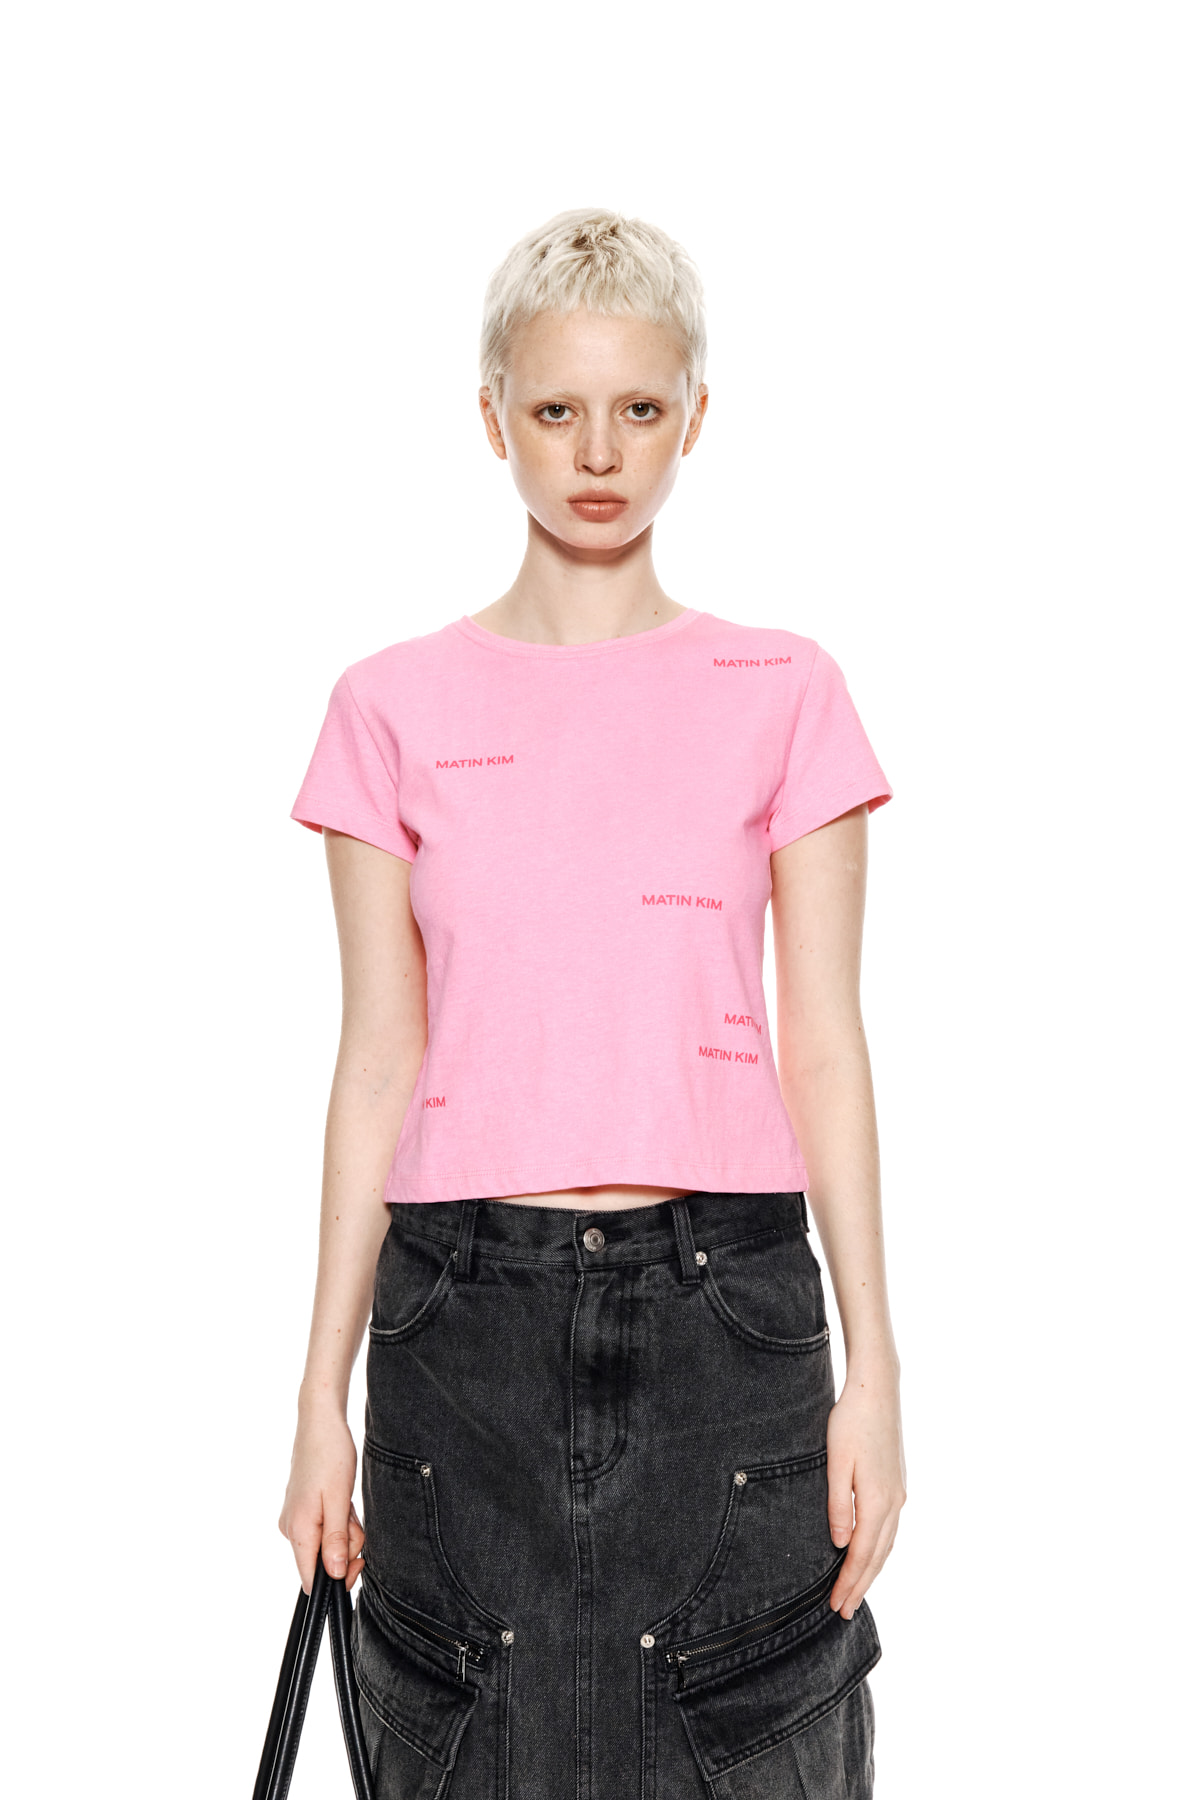 MATIN SMALL LOGO CROP TOP IN PINK